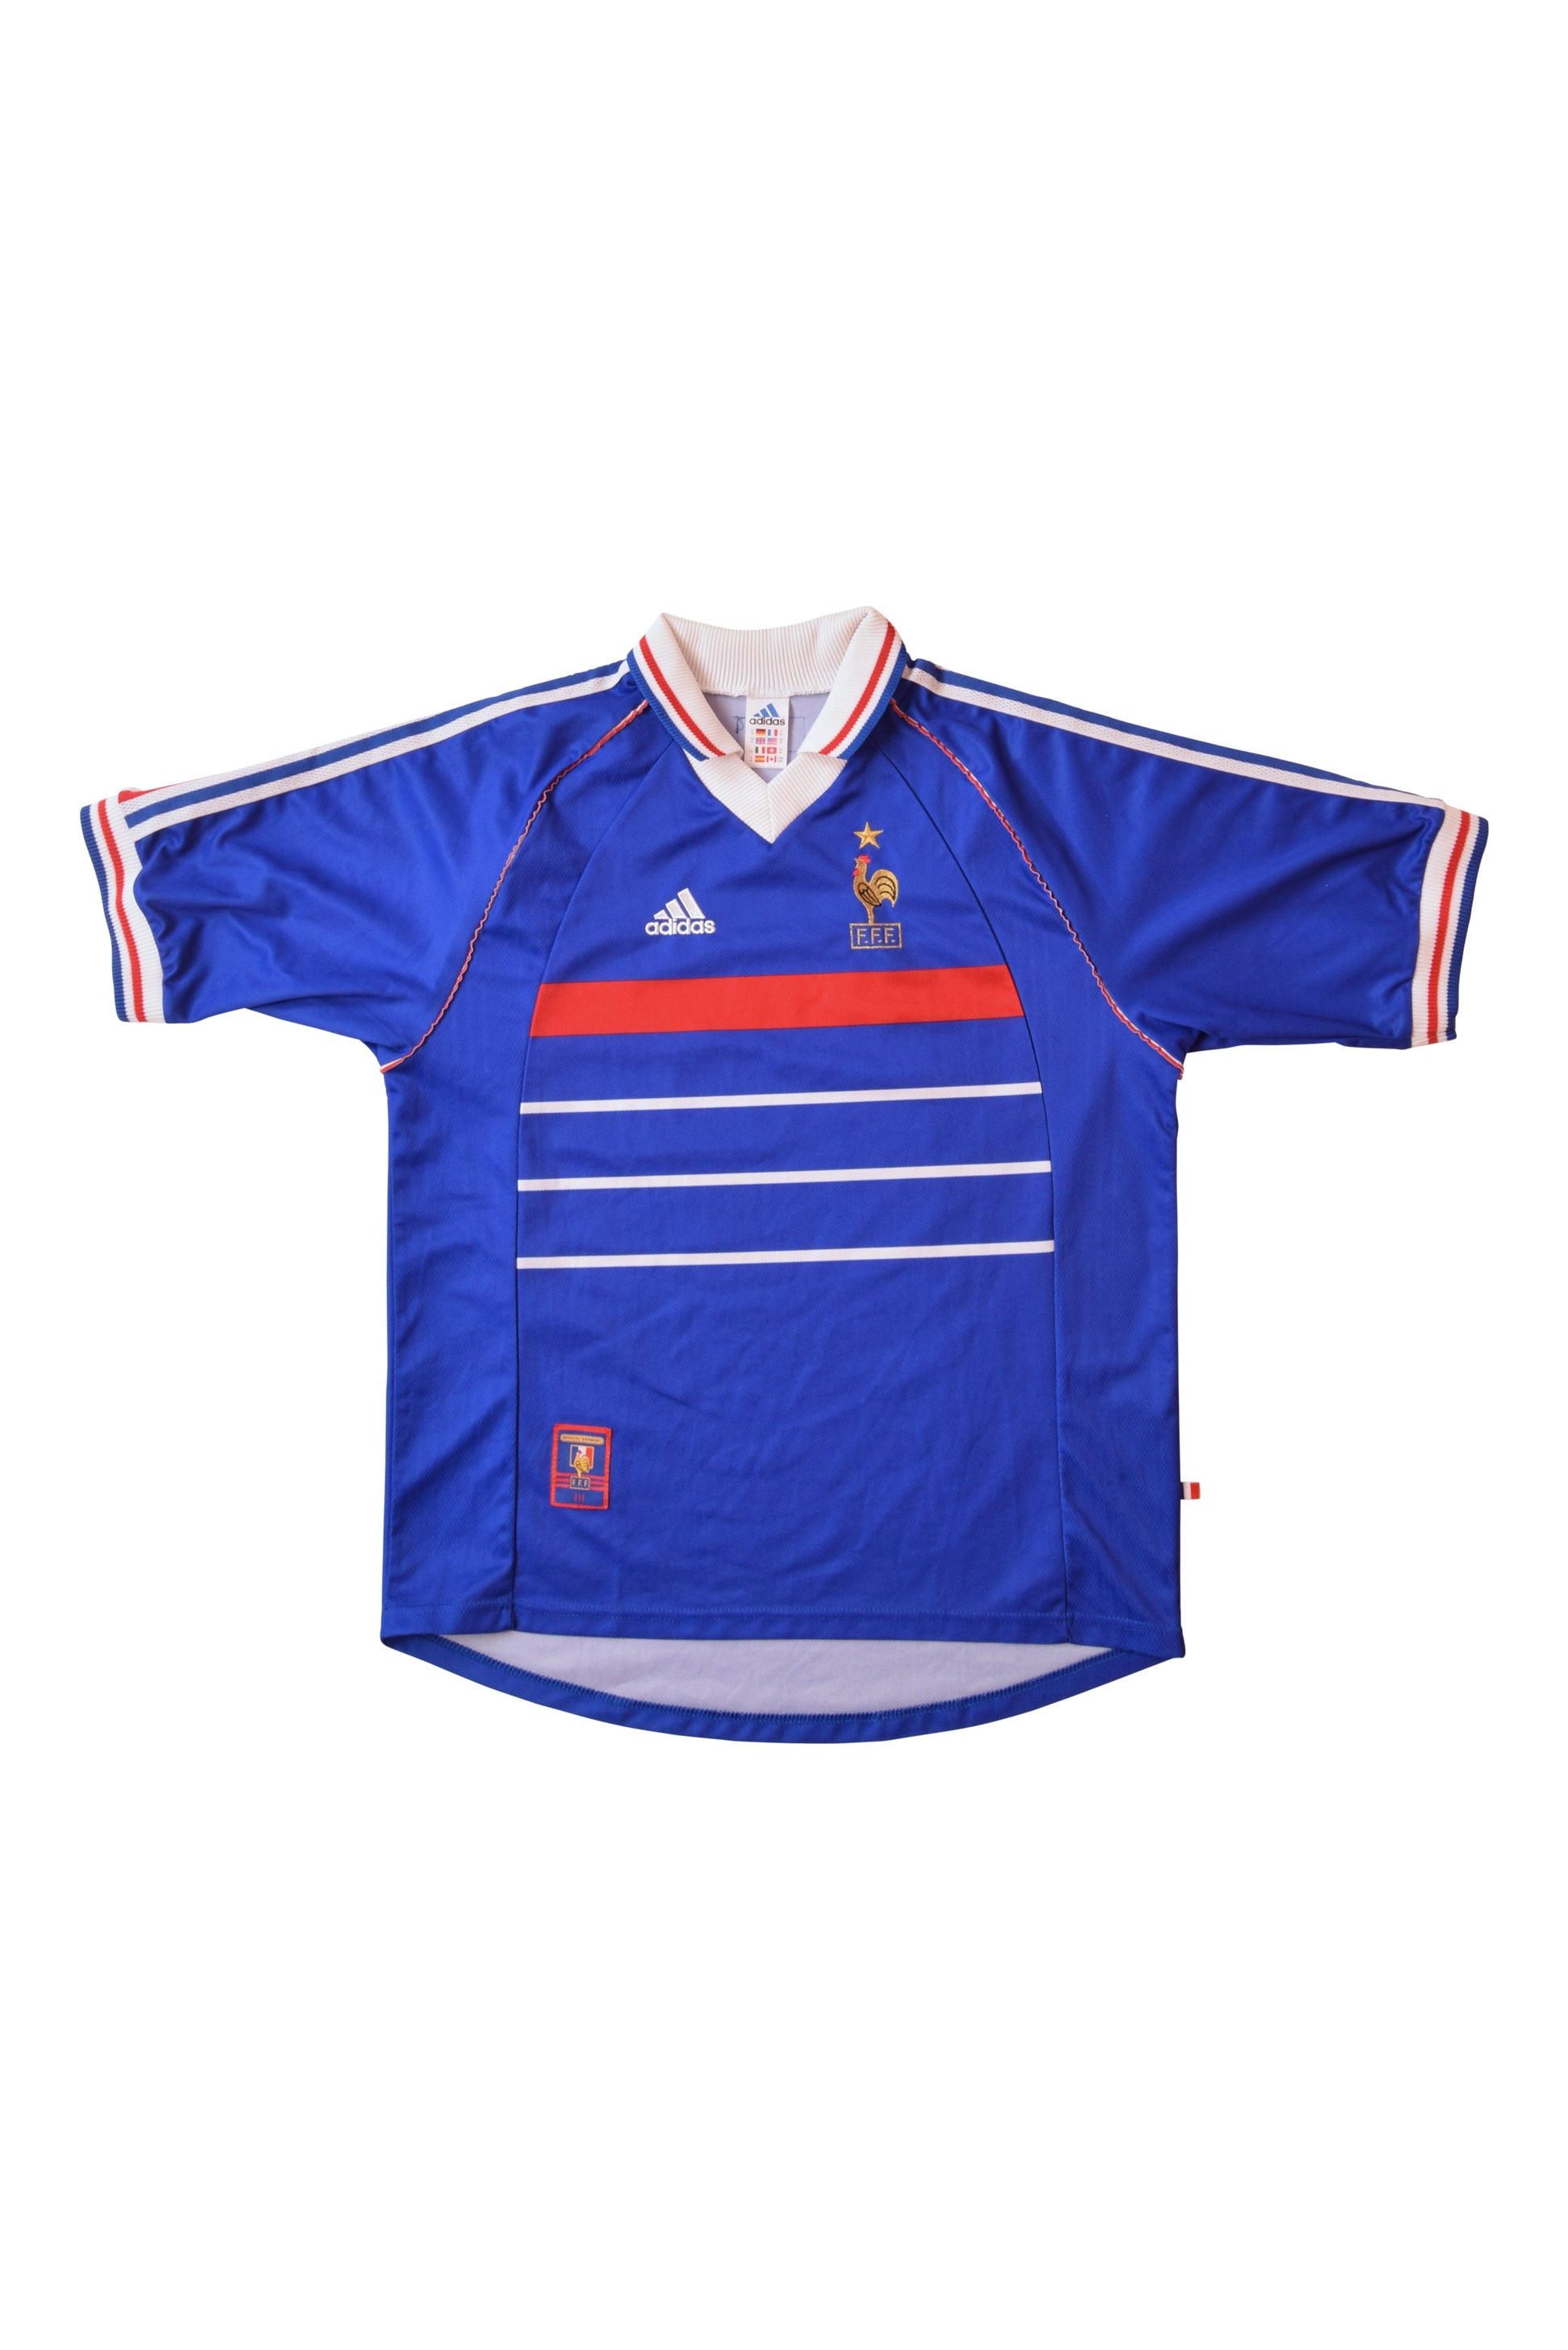 Vintage France Adidas Home Football Shirt 1998 World Cup Size M